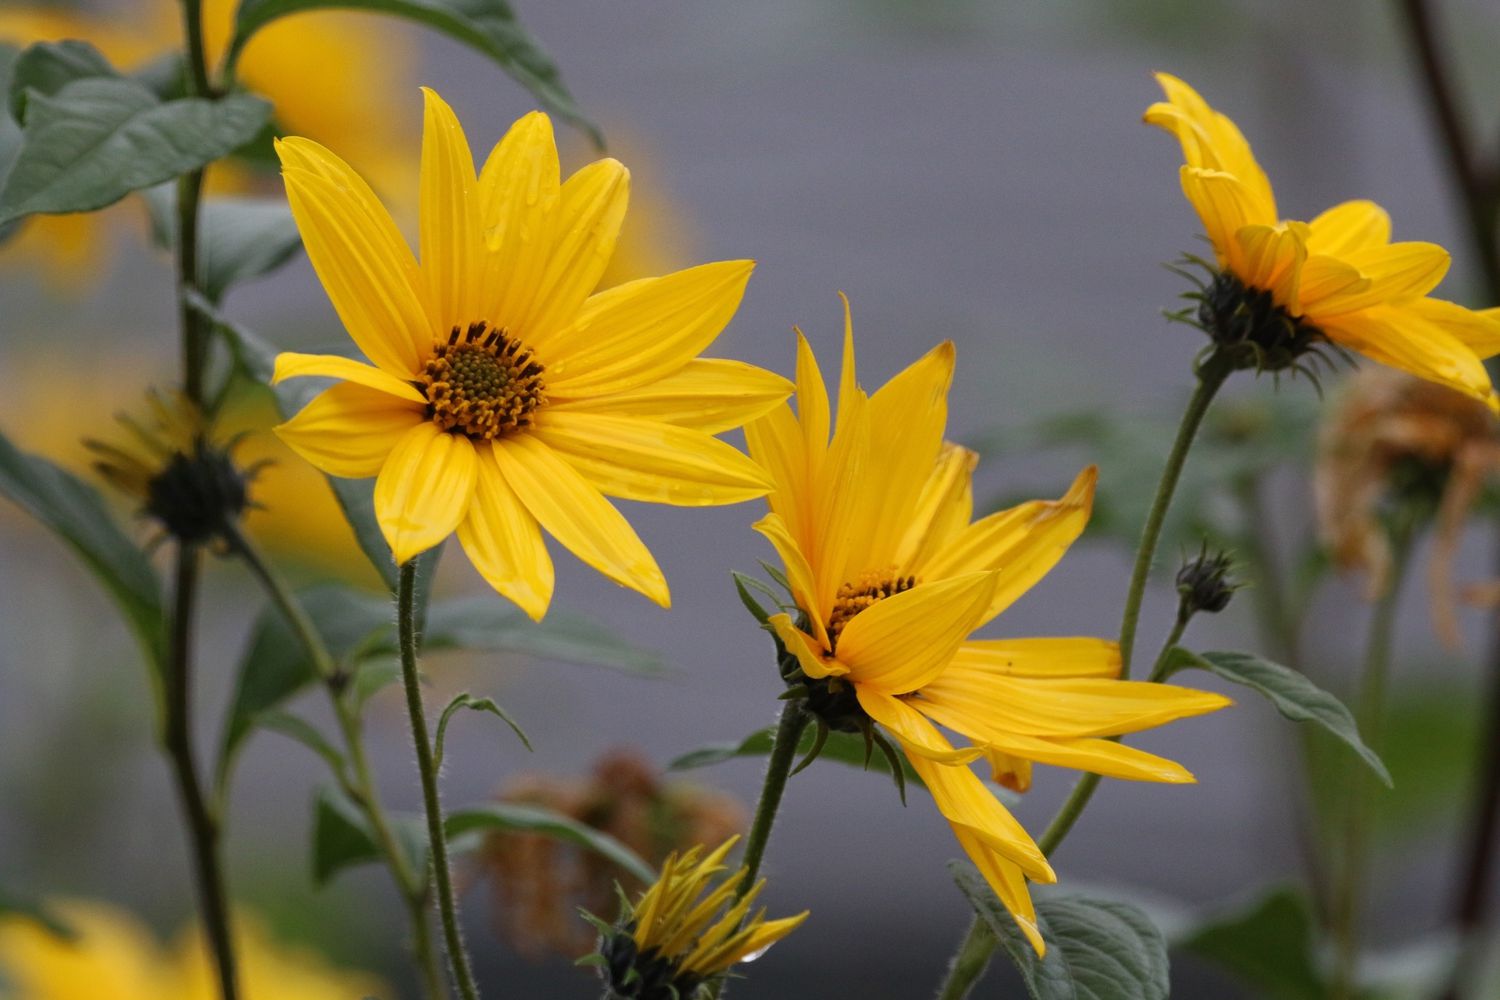 Bright yellow flowers with brown center stamens and dark green leaves